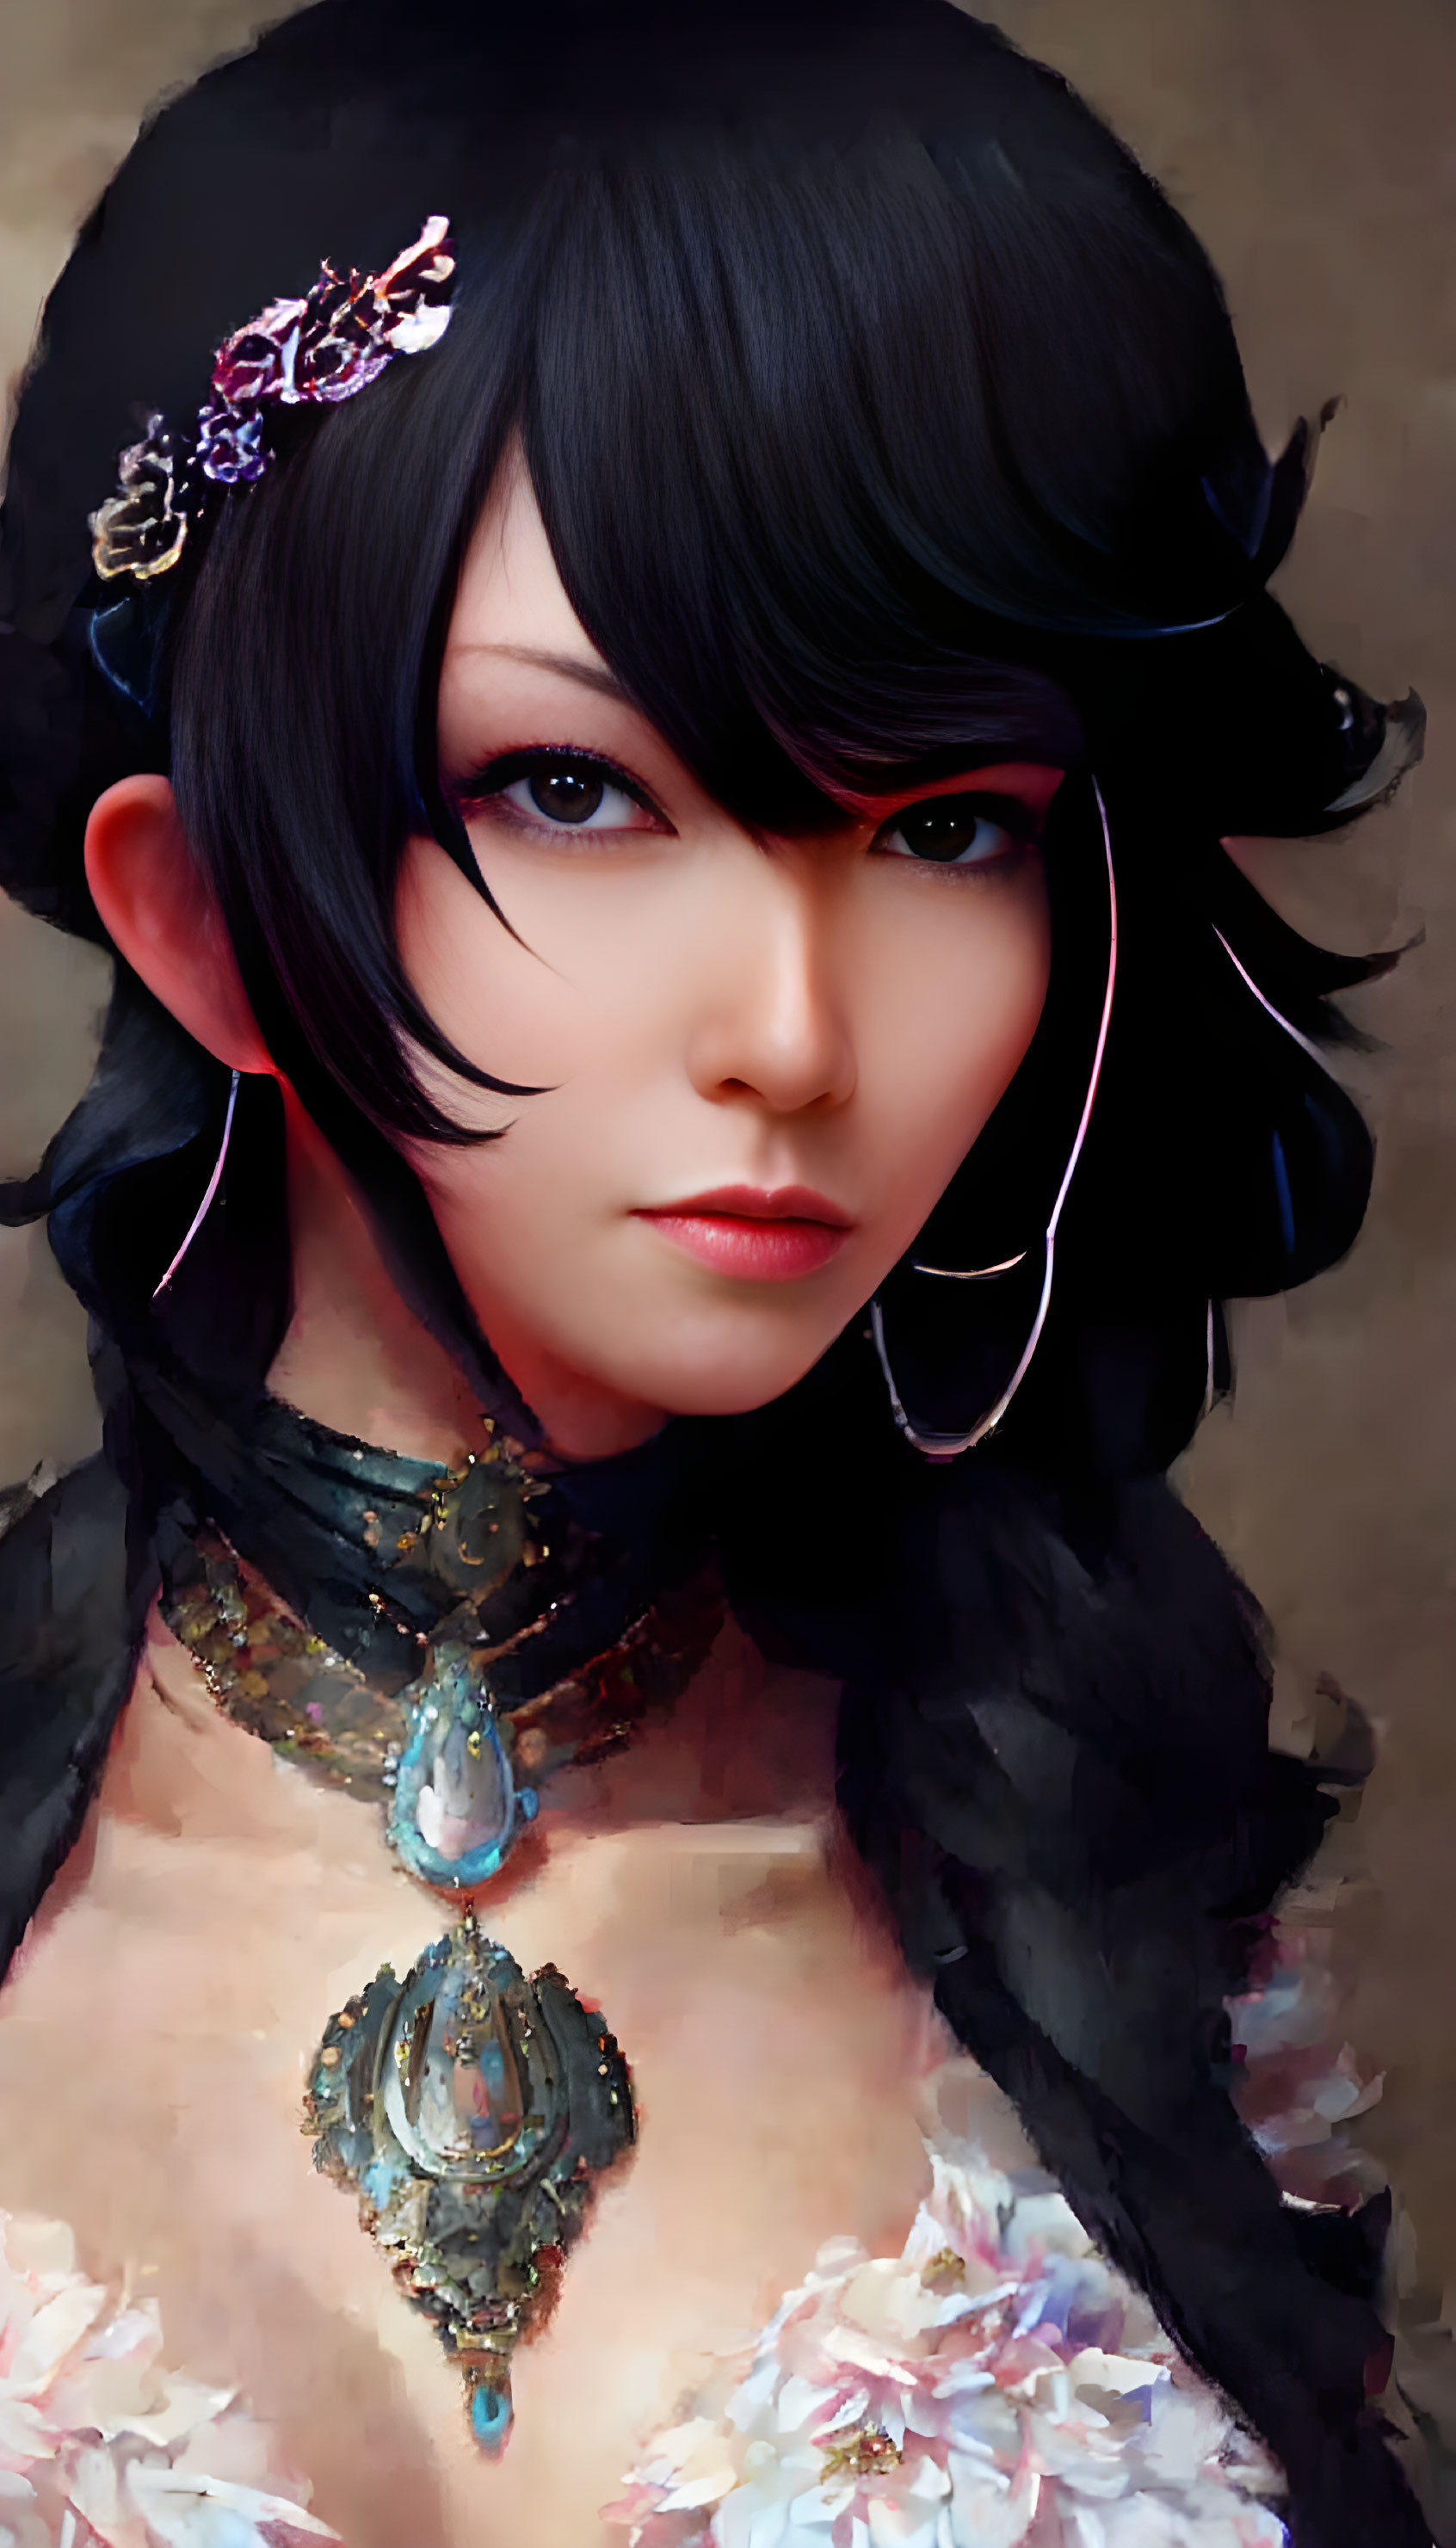 Illustrated woman with dark hair and ornate accessories on neutral background